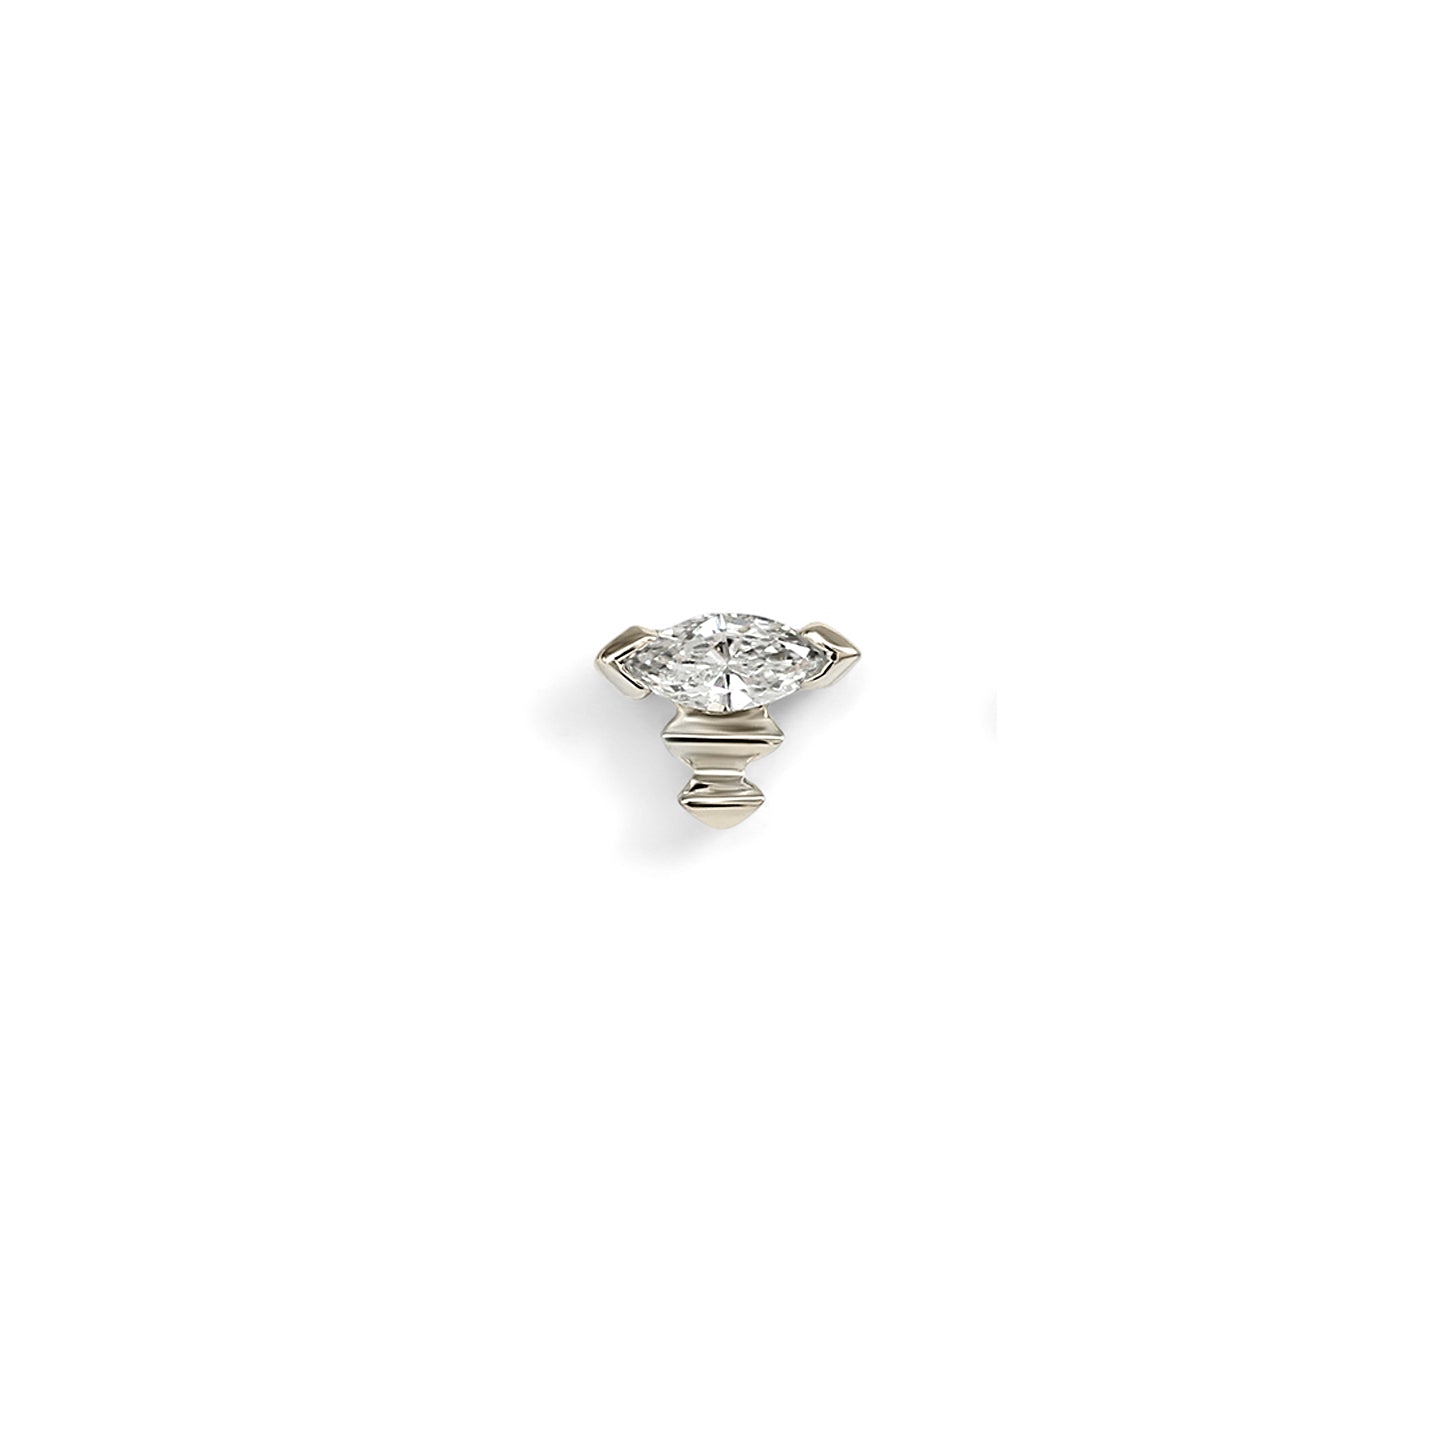 Edge Earring / Lab Marquise Diamond + White Gold by Goldpoint